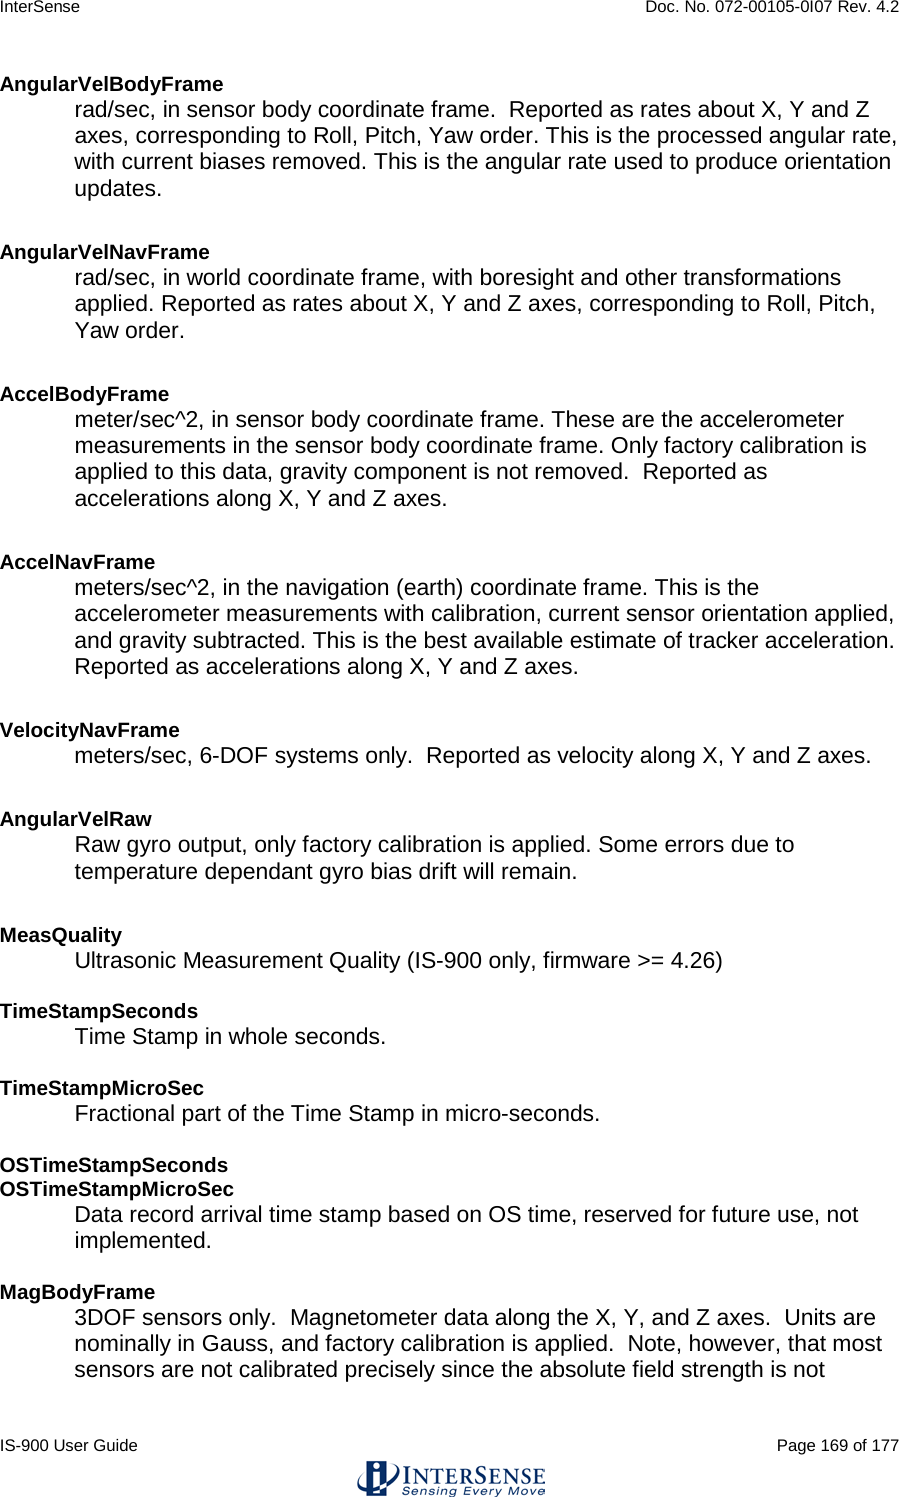 InterSense    Doc. No. 072-00105-0I07 Rev. 4.2 IS-900 User Guide                                                                                                                                          Page 169 of 177  AngularVelBodyFrame rad/sec, in sensor body coordinate frame.  Reported as rates about X, Y and Z axes, corresponding to Roll, Pitch, Yaw order. This is the processed angular rate, with current biases removed. This is the angular rate used to produce orientation updates.  AngularVelNavFrame rad/sec, in world coordinate frame, with boresight and other transformations applied. Reported as rates about X, Y and Z axes, corresponding to Roll, Pitch, Yaw order.  AccelBodyFrame meter/sec^2, in sensor body coordinate frame. These are the accelerometer measurements in the sensor body coordinate frame. Only factory calibration is applied to this data, gravity component is not removed.  Reported as accelerations along X, Y and Z axes.  AccelNavFrame meters/sec^2, in the navigation (earth) coordinate frame. This is the accelerometer measurements with calibration, current sensor orientation applied, and gravity subtracted. This is the best available estimate of tracker acceleration. Reported as accelerations along X, Y and Z axes.  VelocityNavFrame meters/sec, 6-DOF systems only.  Reported as velocity along X, Y and Z axes. AngularVelRaw Raw gyro output, only factory calibration is applied. Some errors due to temperature dependant gyro bias drift will remain.  MeasQuality Ultrasonic Measurement Quality (IS-900 only, firmware &gt;= 4.26)  TimeStampSeconds Time Stamp in whole seconds.  TimeStampMicroSec Fractional part of the Time Stamp in micro-seconds.  OSTimeStampSeconds OSTimeStampMicroSec Data record arrival time stamp based on OS time, reserved for future use, not implemented.  MagBodyFrame 3DOF sensors only.  Magnetometer data along the X, Y, and Z axes.  Units are nominally in Gauss, and factory calibration is applied.  Note, however, that most sensors are not calibrated precisely since the absolute field strength is not 